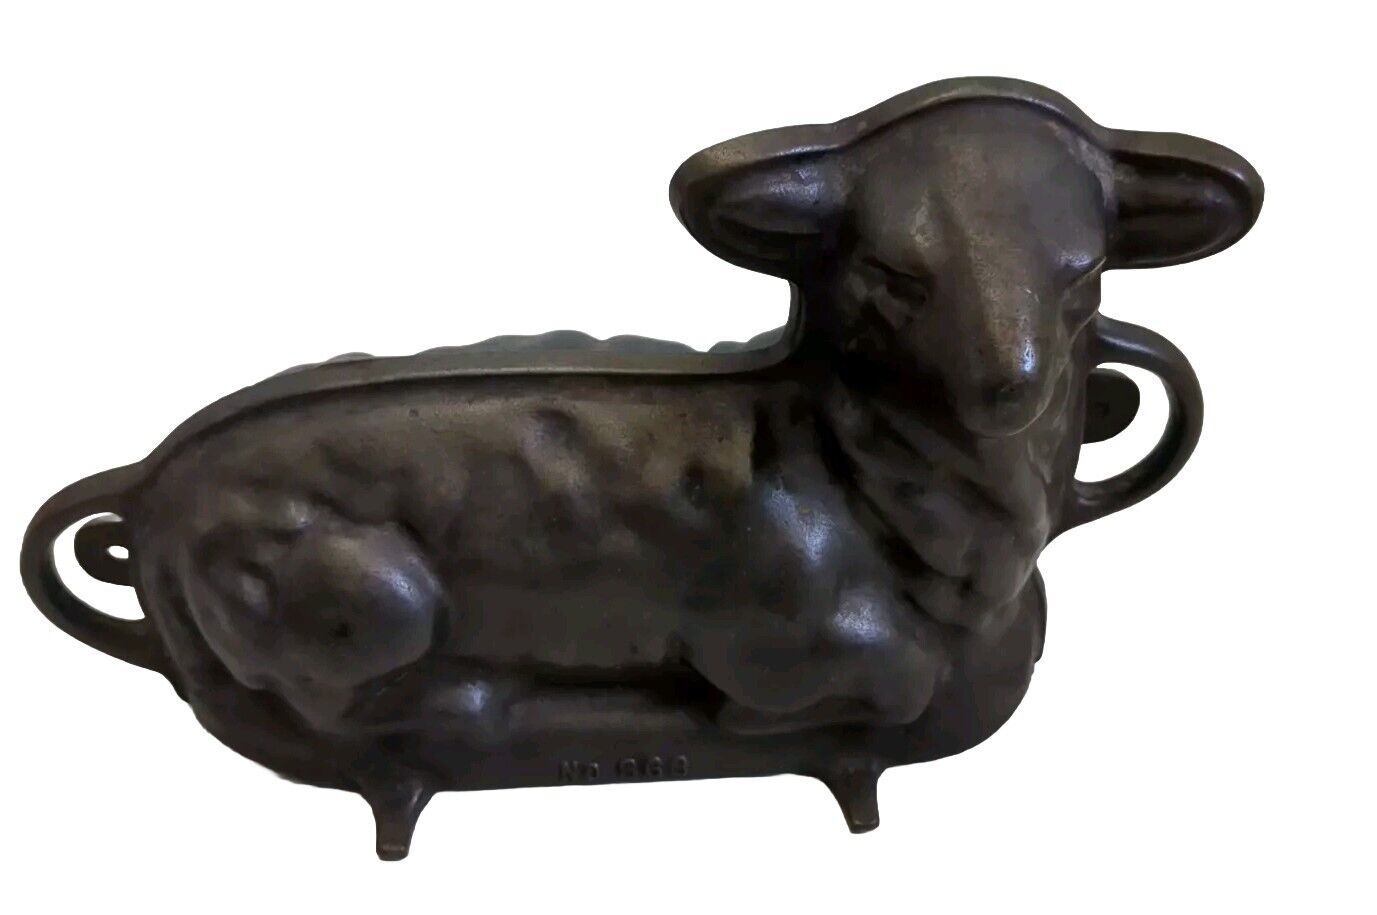 Vintage Griswold Cast Iron Easter Lamb Cake Mold No 866 2 Pieces 921 922